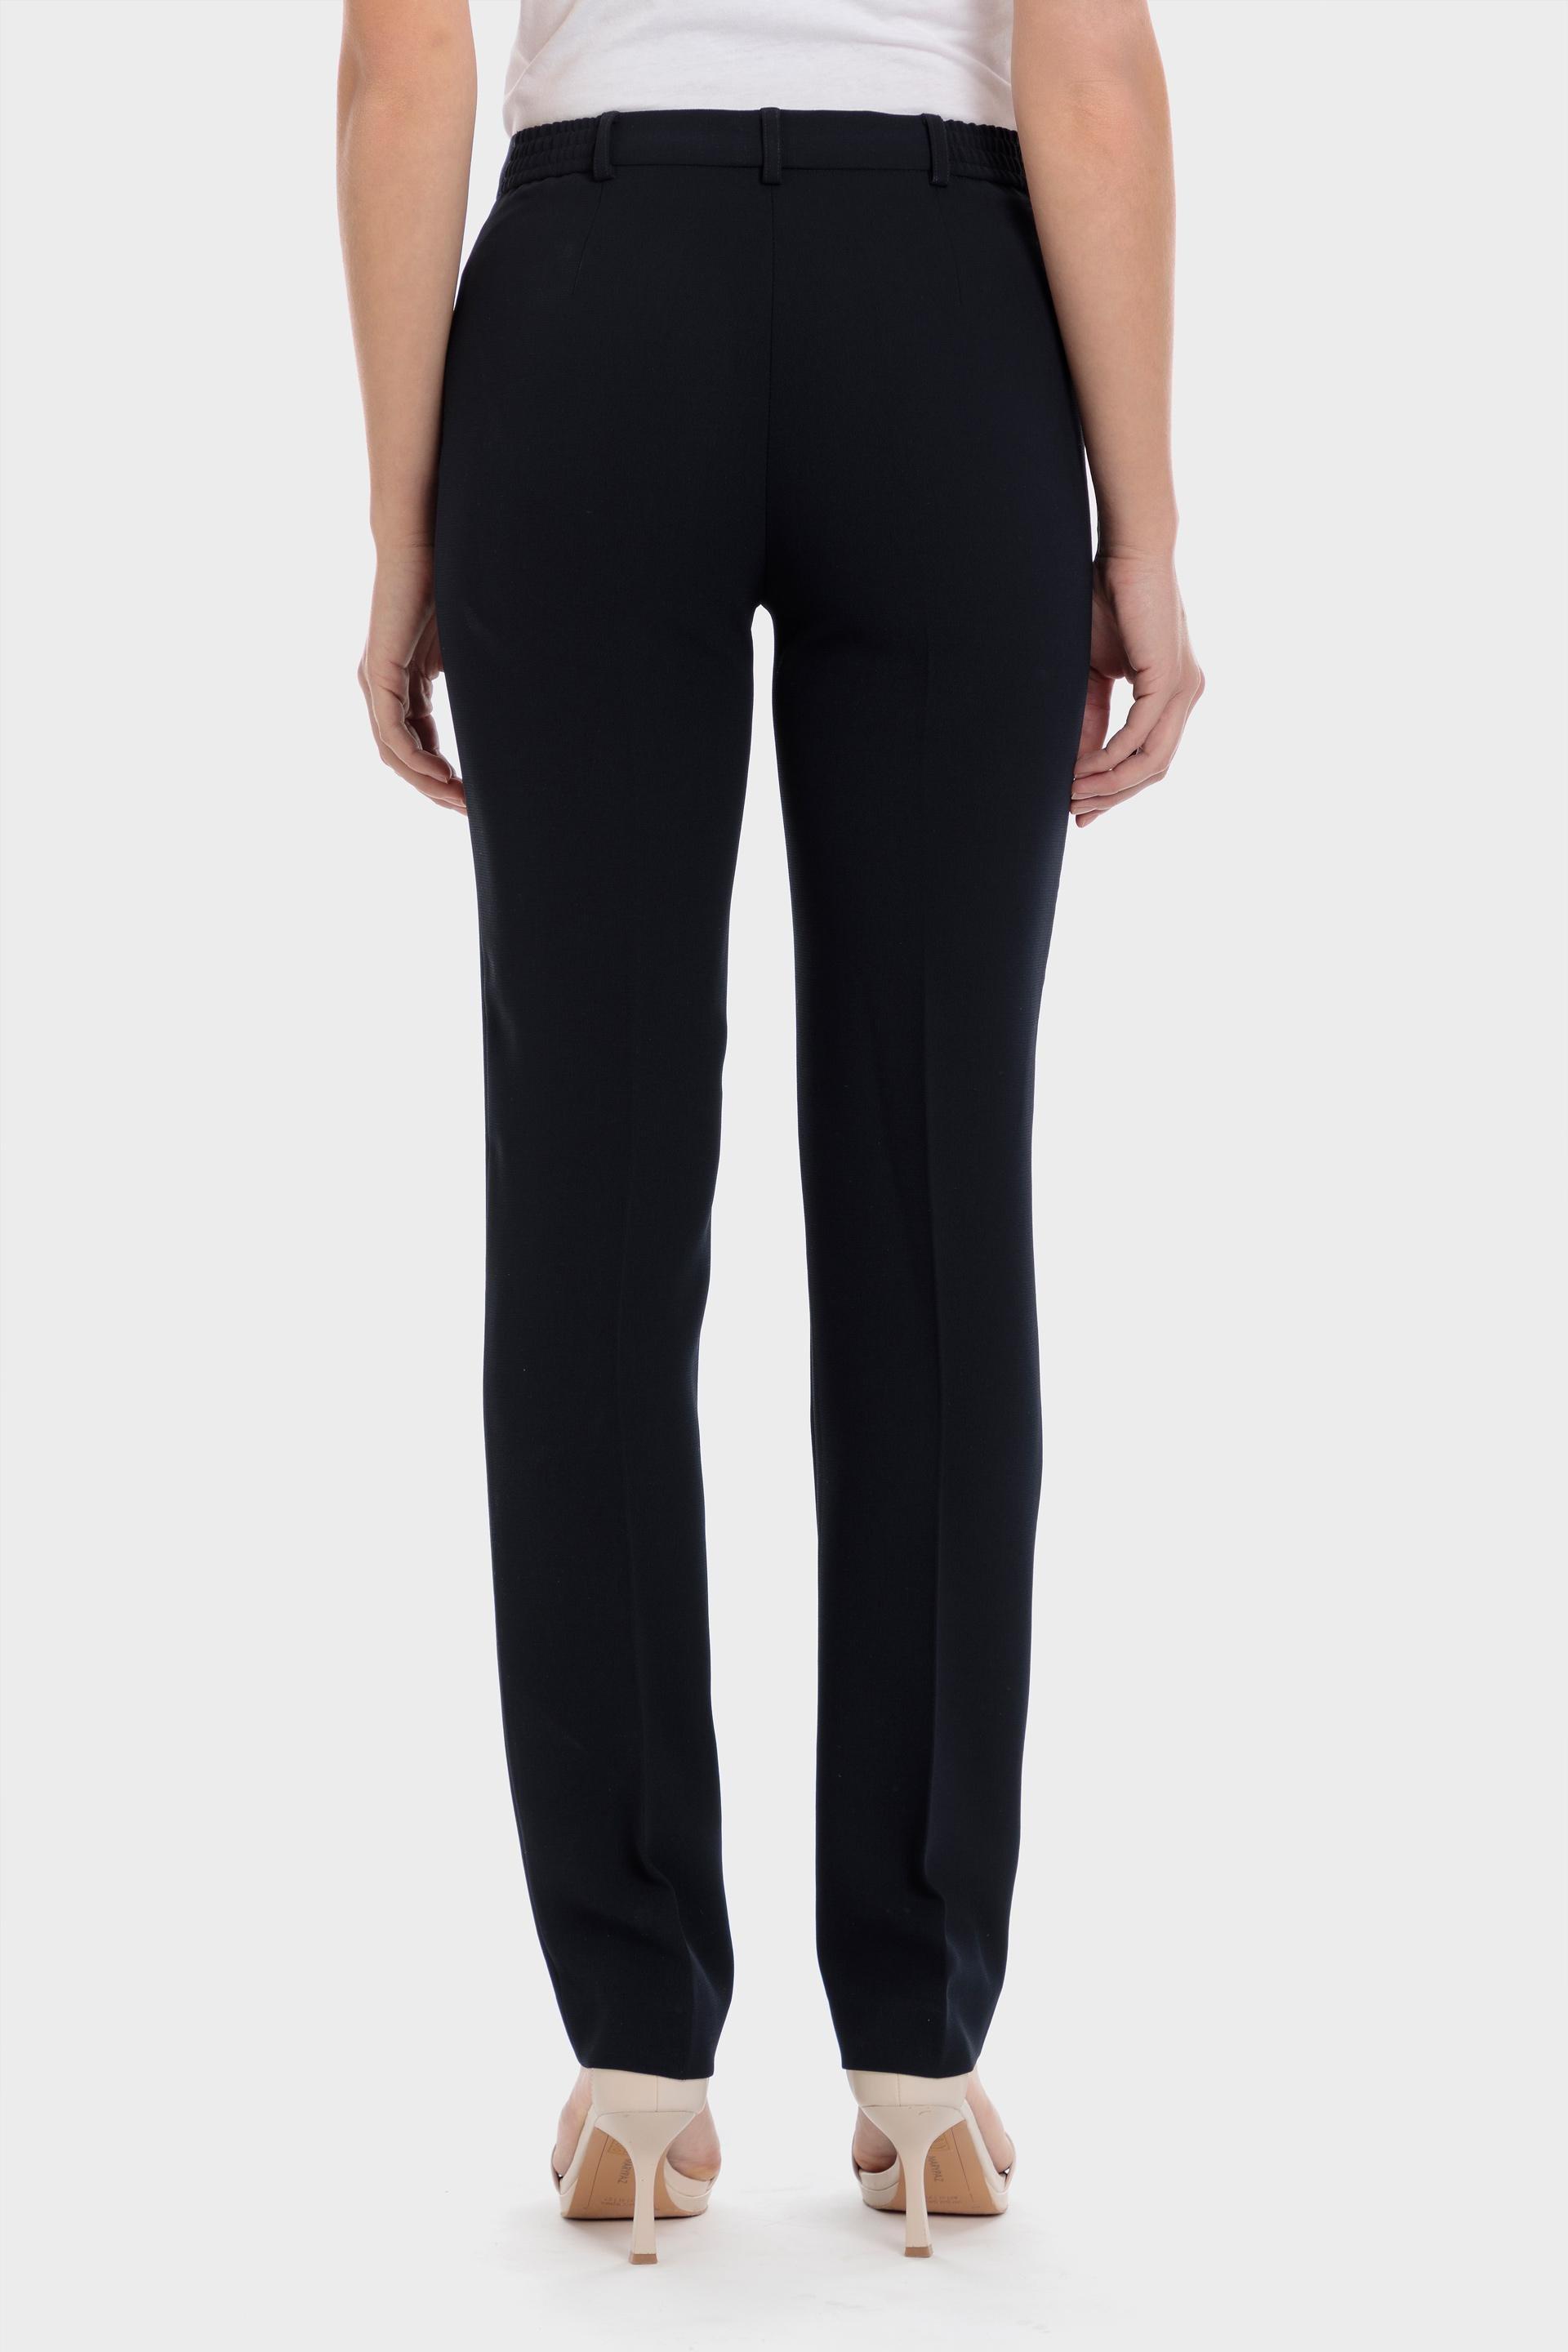 Punt Roma - Navy Crepe Trousers With Elastic